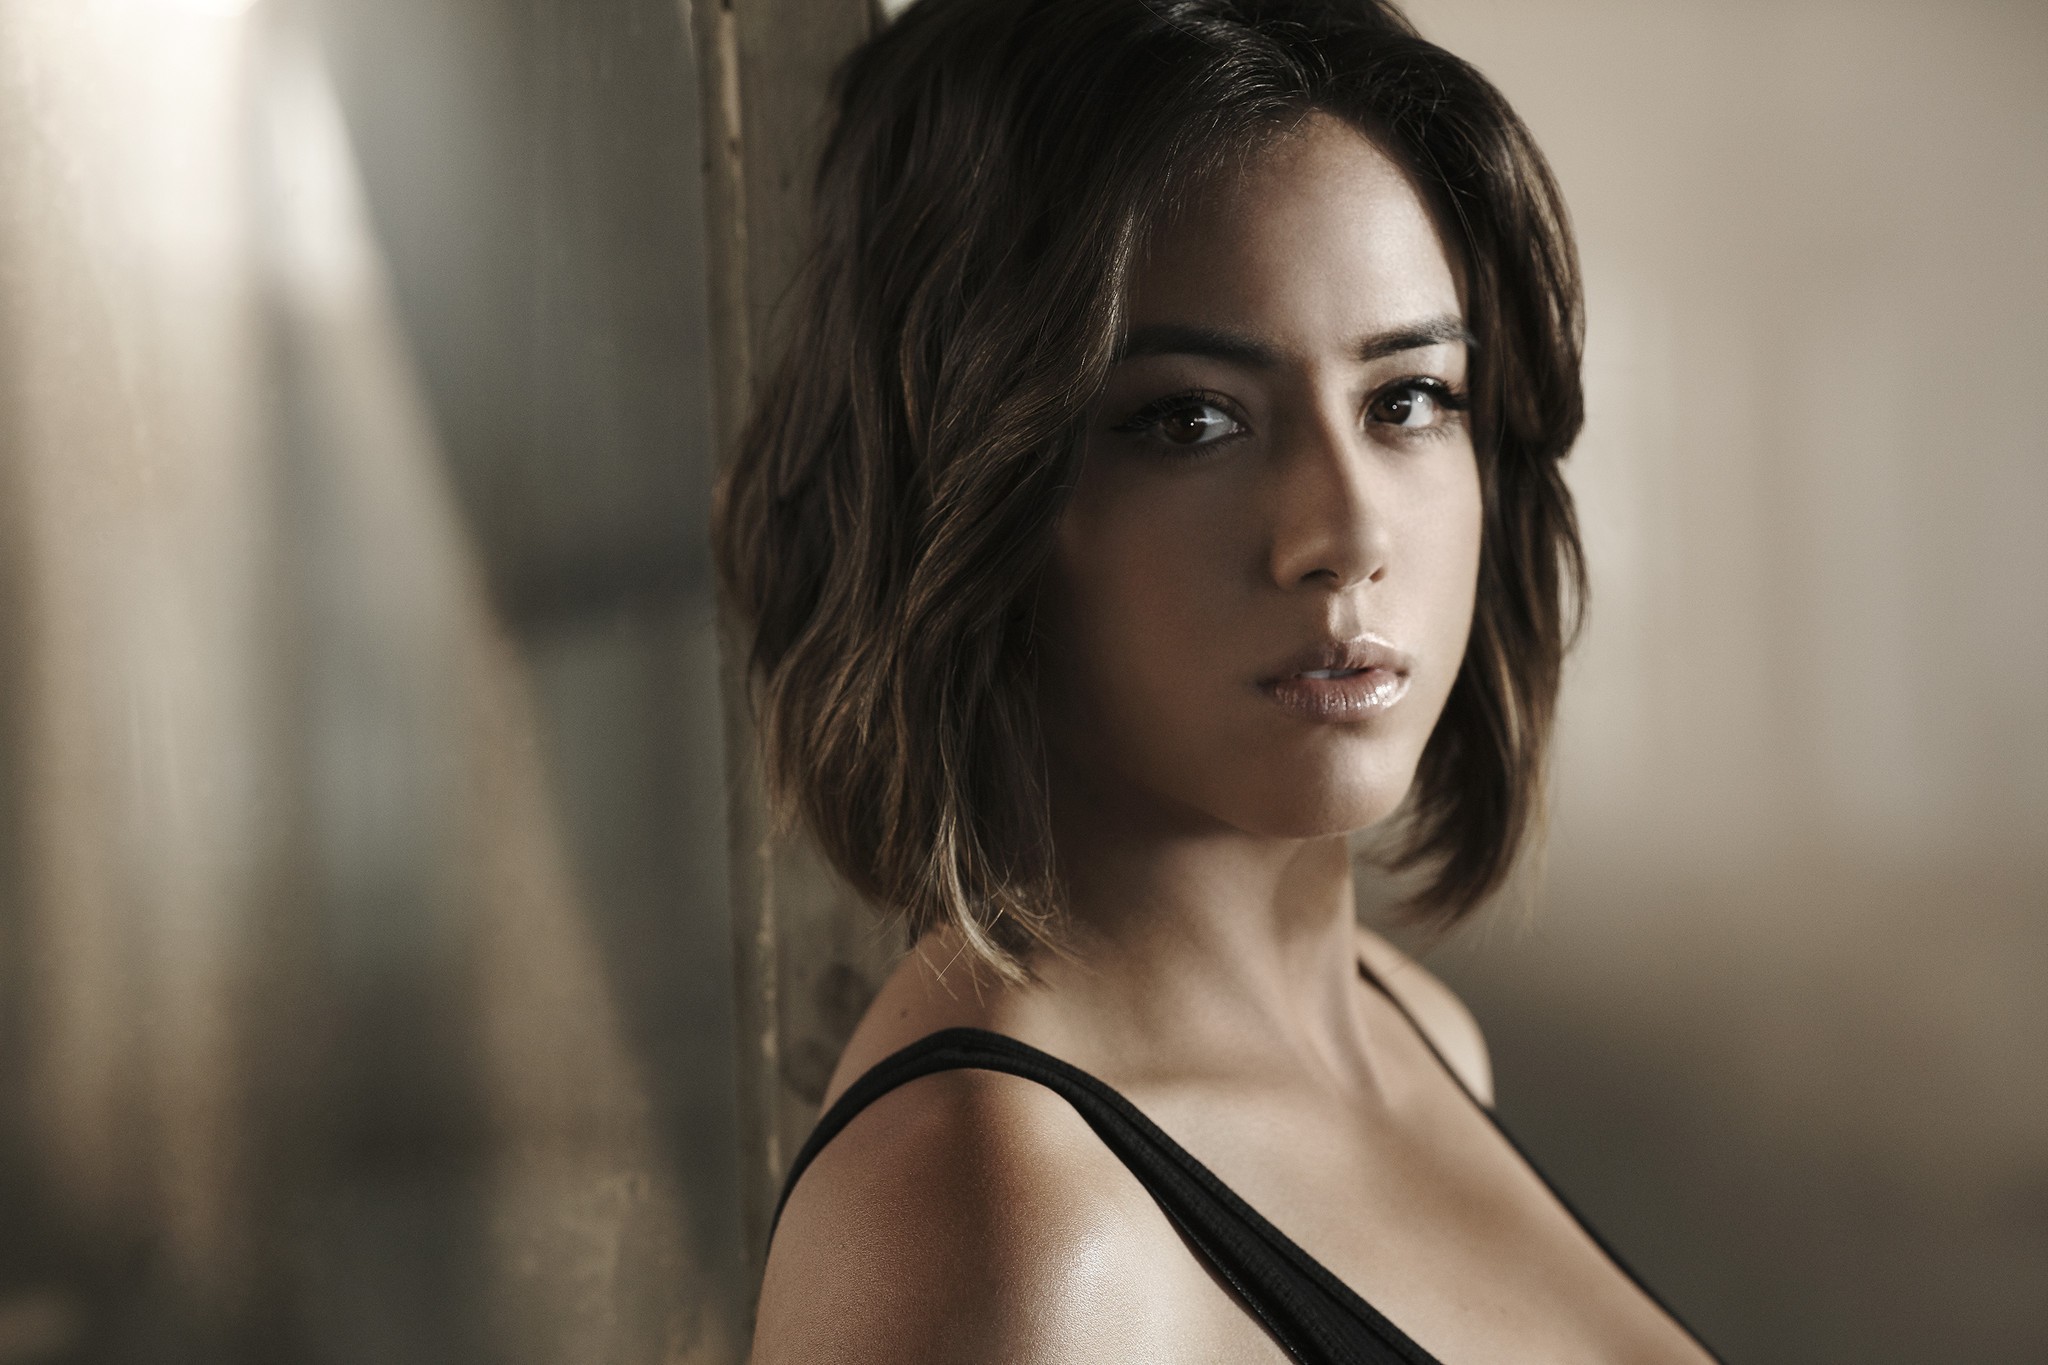 People 2048x1365 women actress brunette Chloe Bennet open mouth looking at viewer tank top bare shoulders depth of field brown eyes face Agents of S.H.I.E.L.D. S.H.I.E.L.D. Marvel TV TV series Marvel Girl closeup